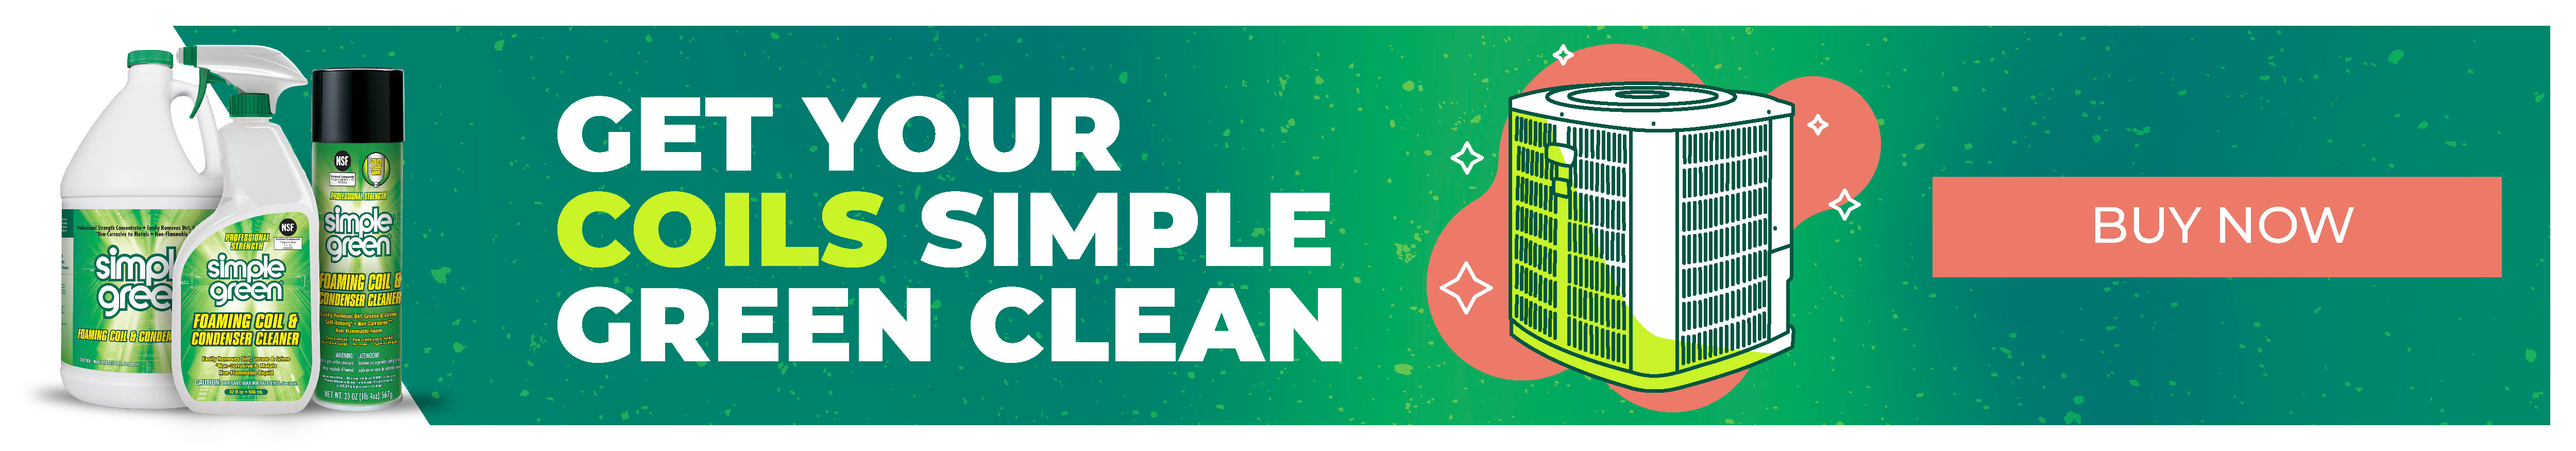 Cleaning Tip Call To Action